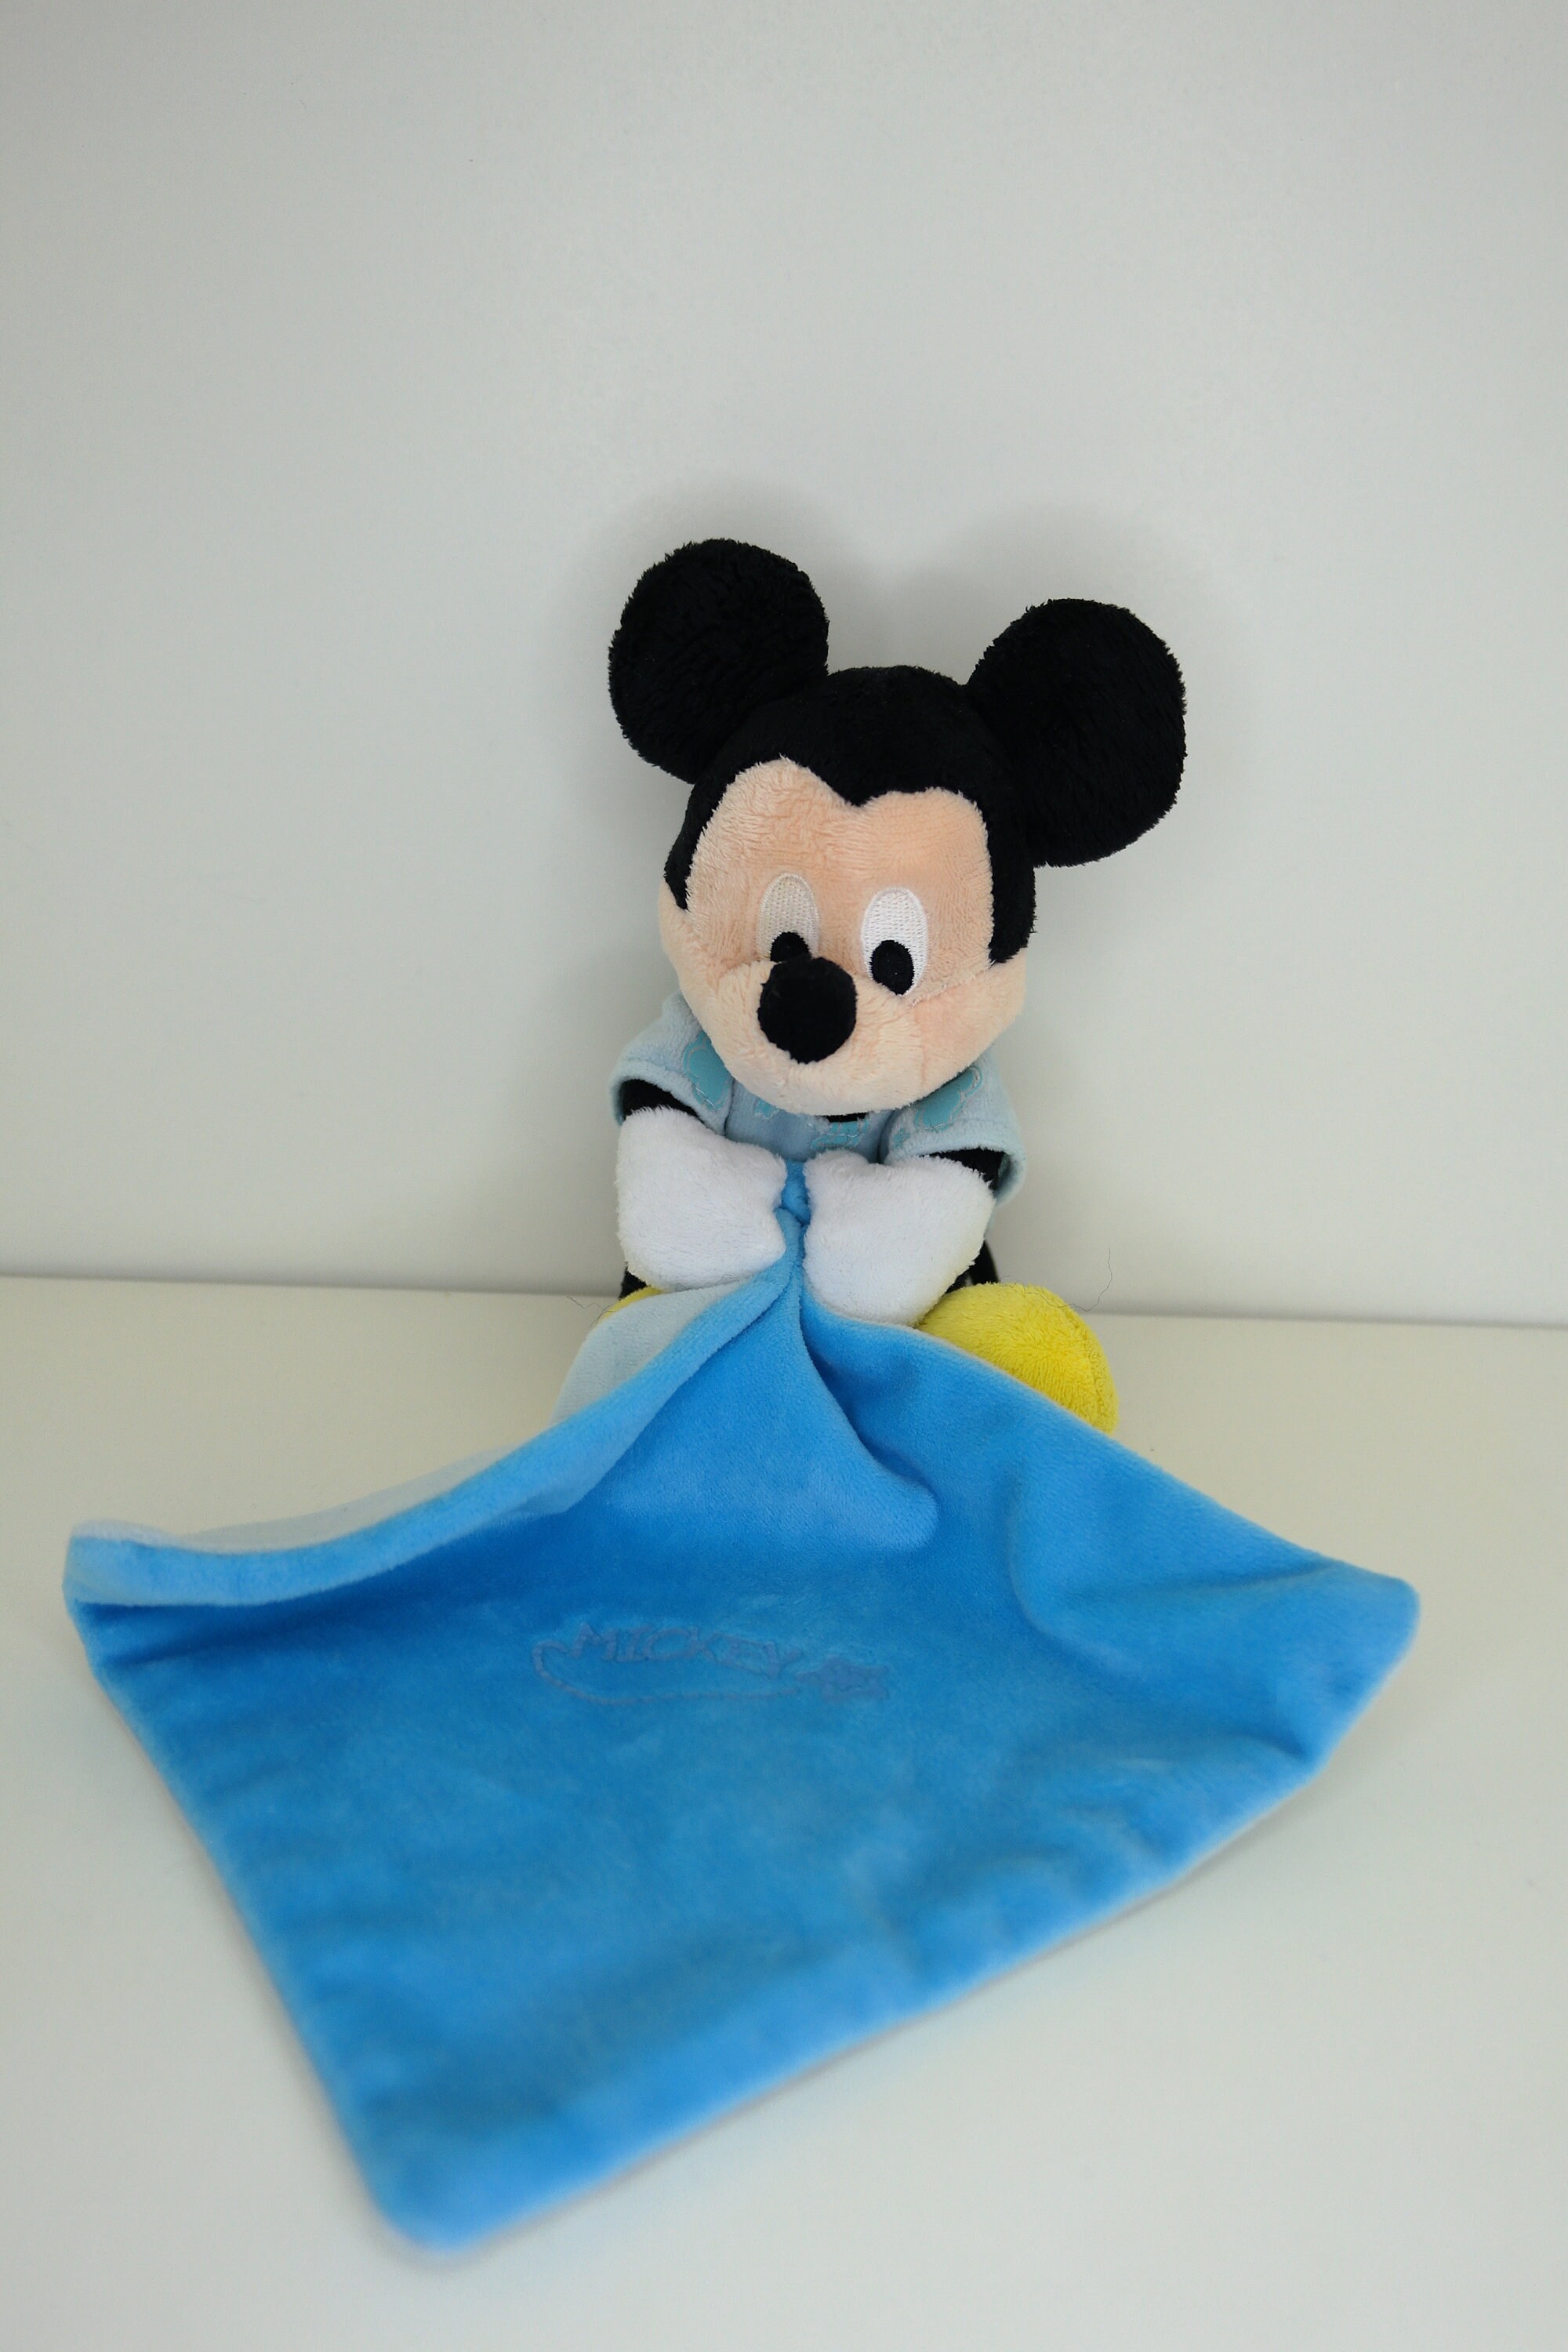 Mickey Mouse Plush Toy Disney Stuffed Toy by Nicotoy Soft 